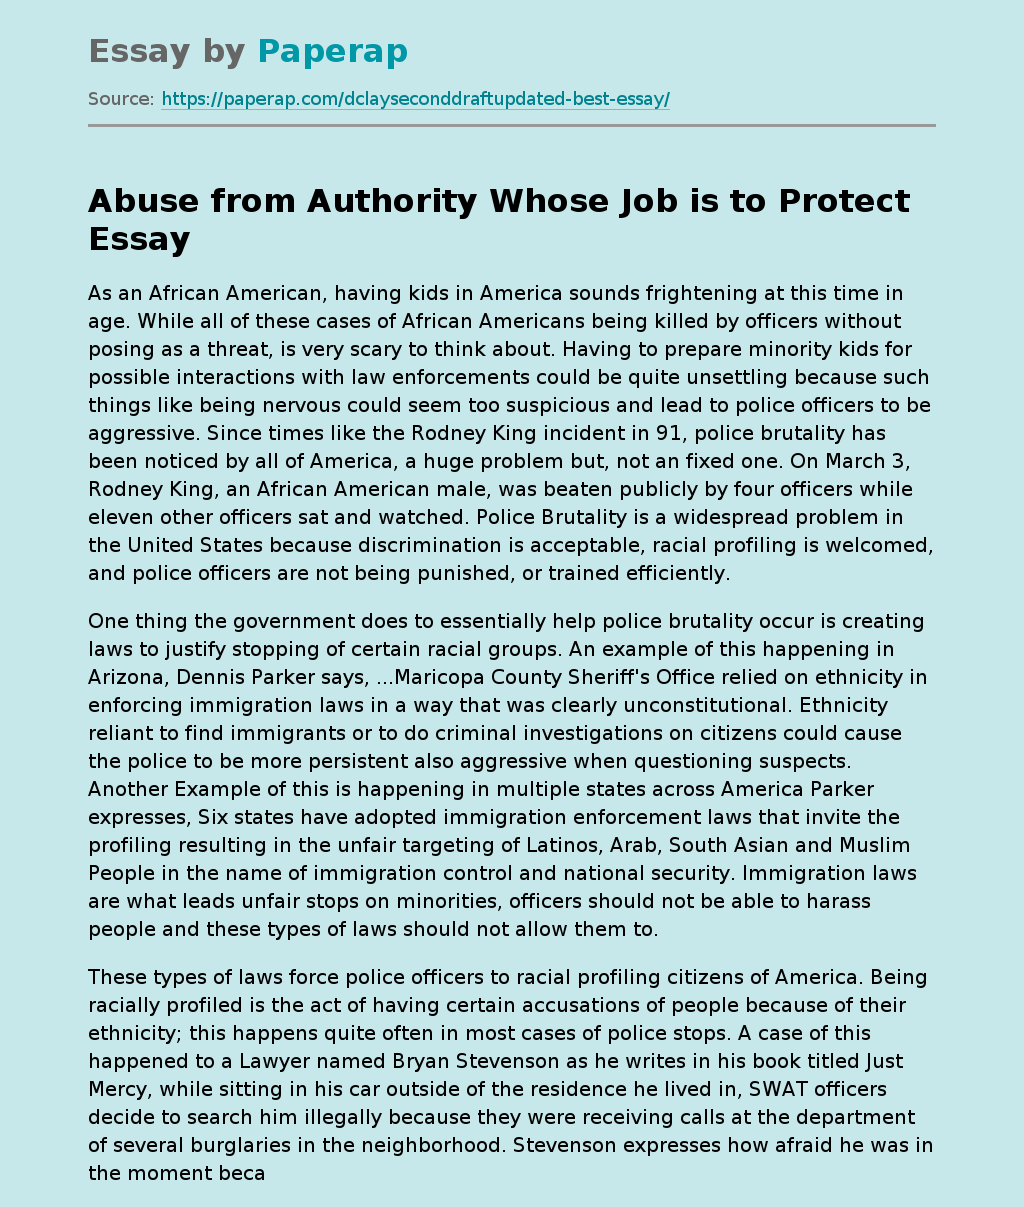 Abuse from Authority Whose Job is to Protect